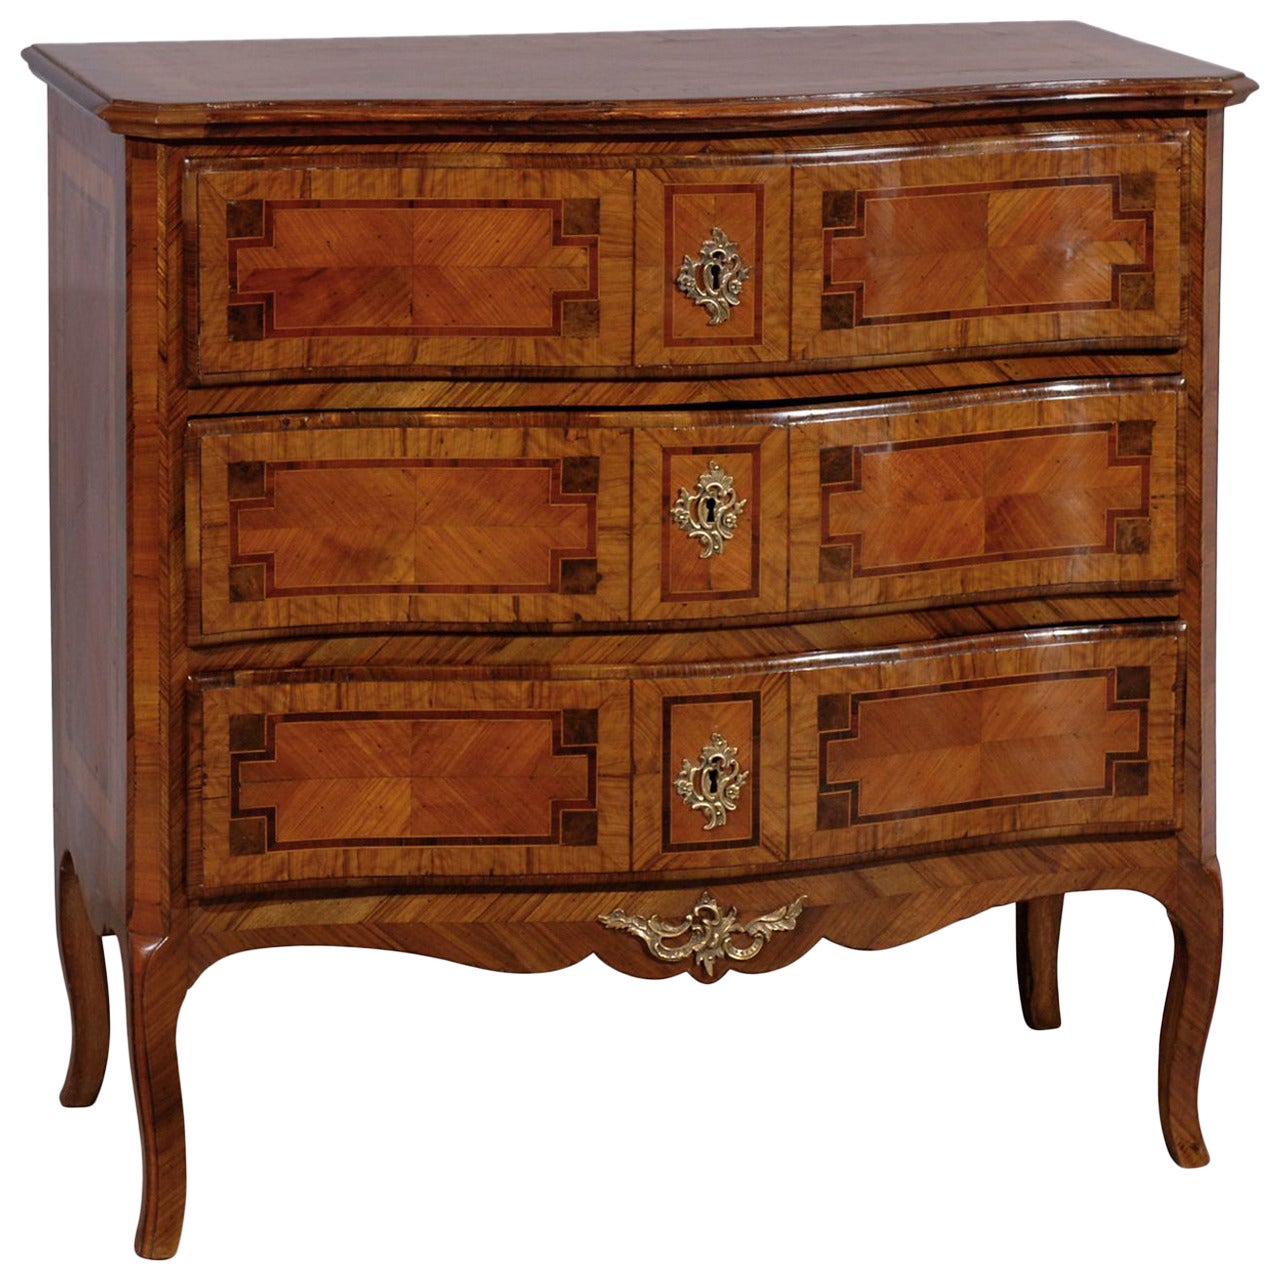 Italian Neoclassical Inlaid Commode with Serpentine Front, circa 1800